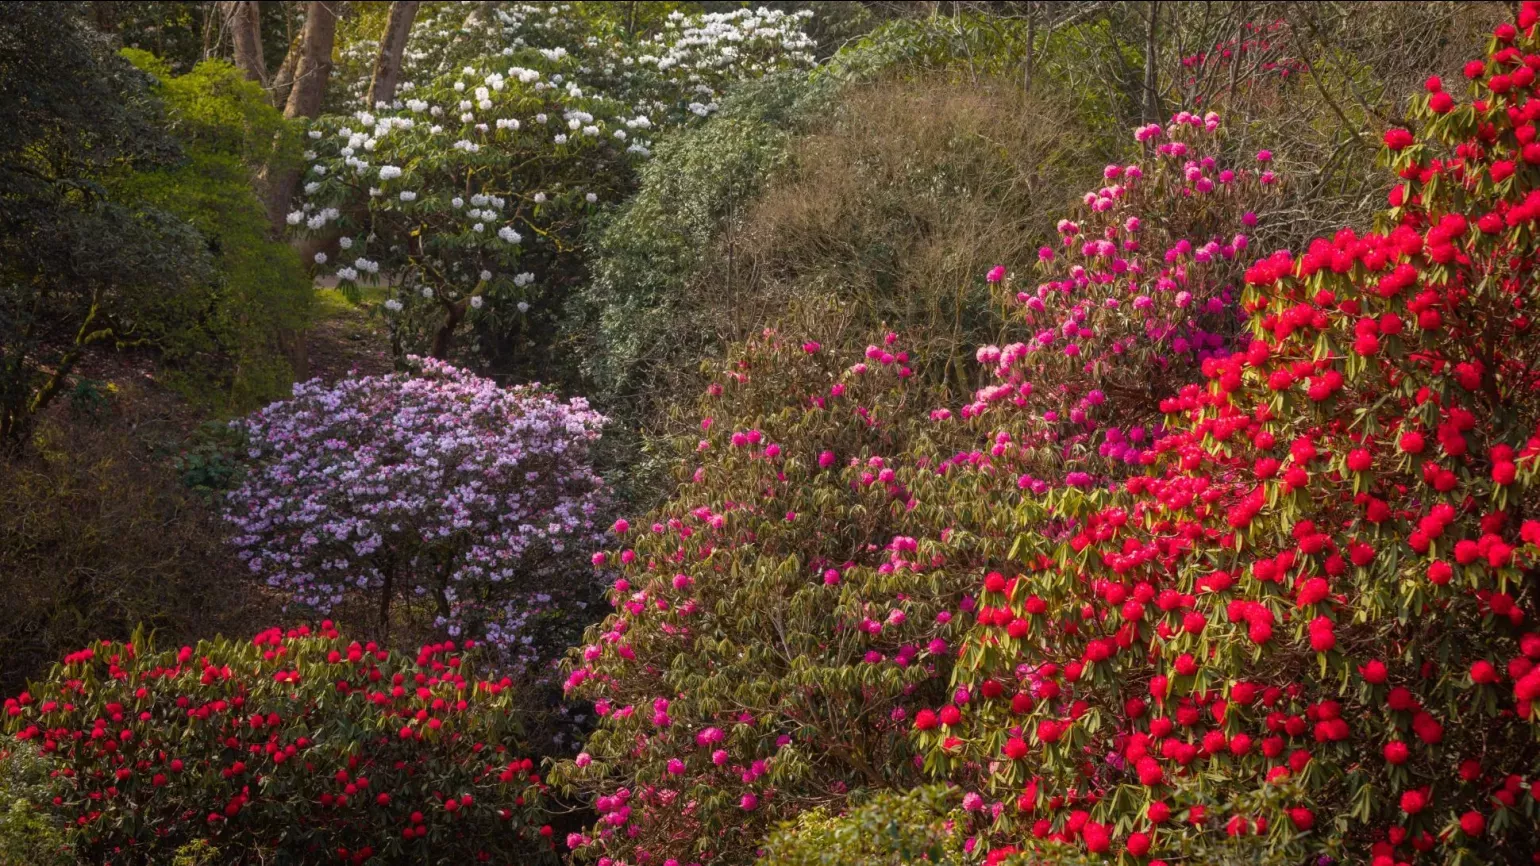 An image of red purple and white rhododendrons bushes